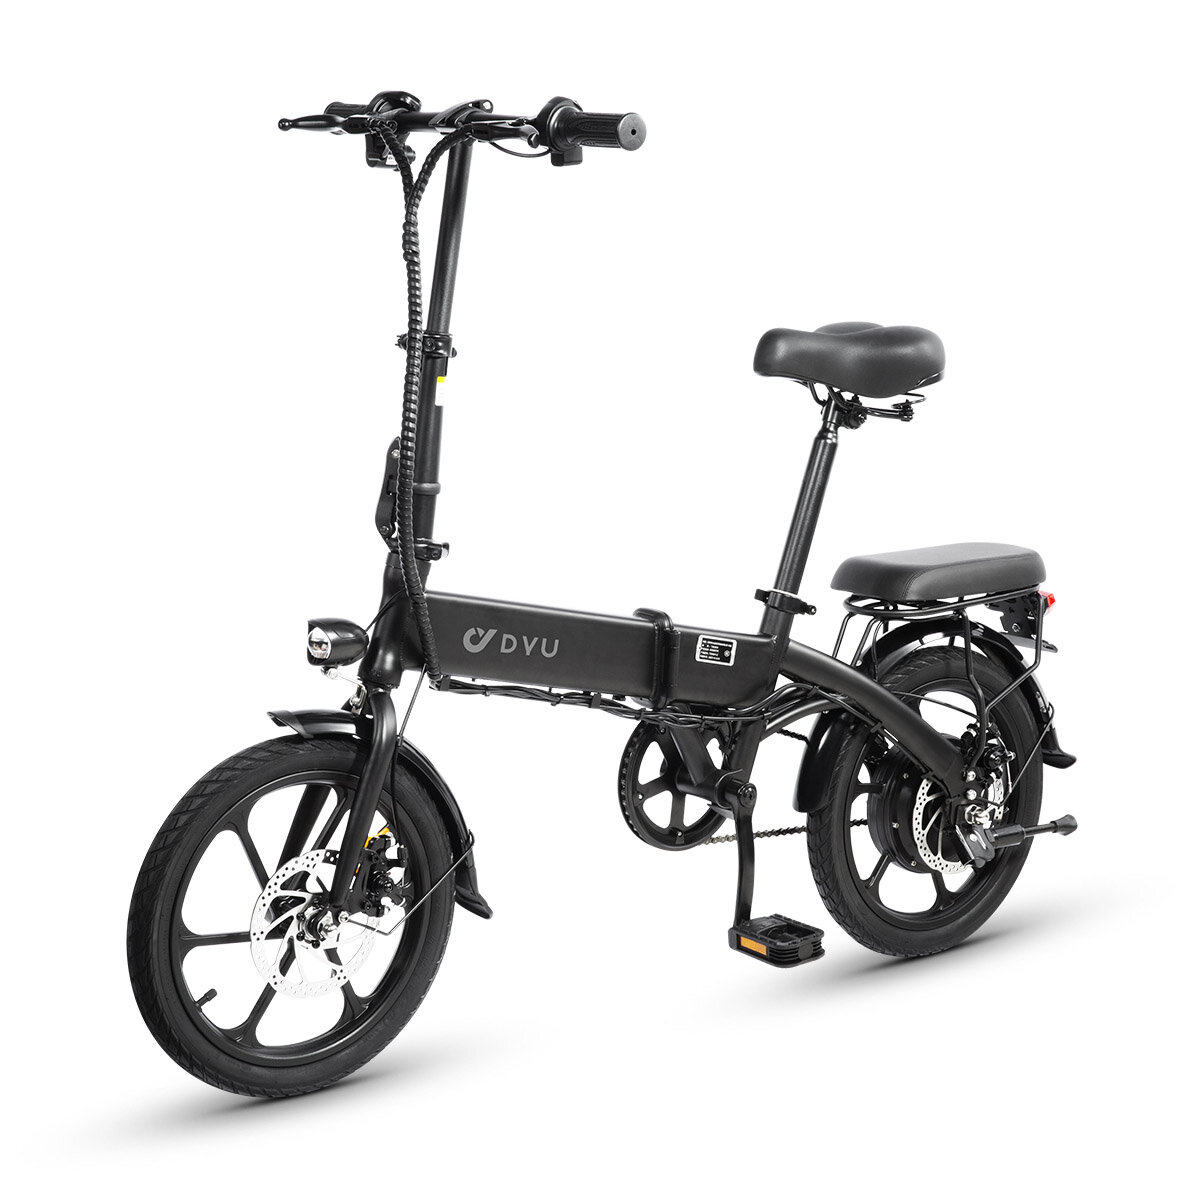 best price,dyu,a1f,36v,250w,7.5ah,16inch,electric,bicycle,eu,coupon,price,discount